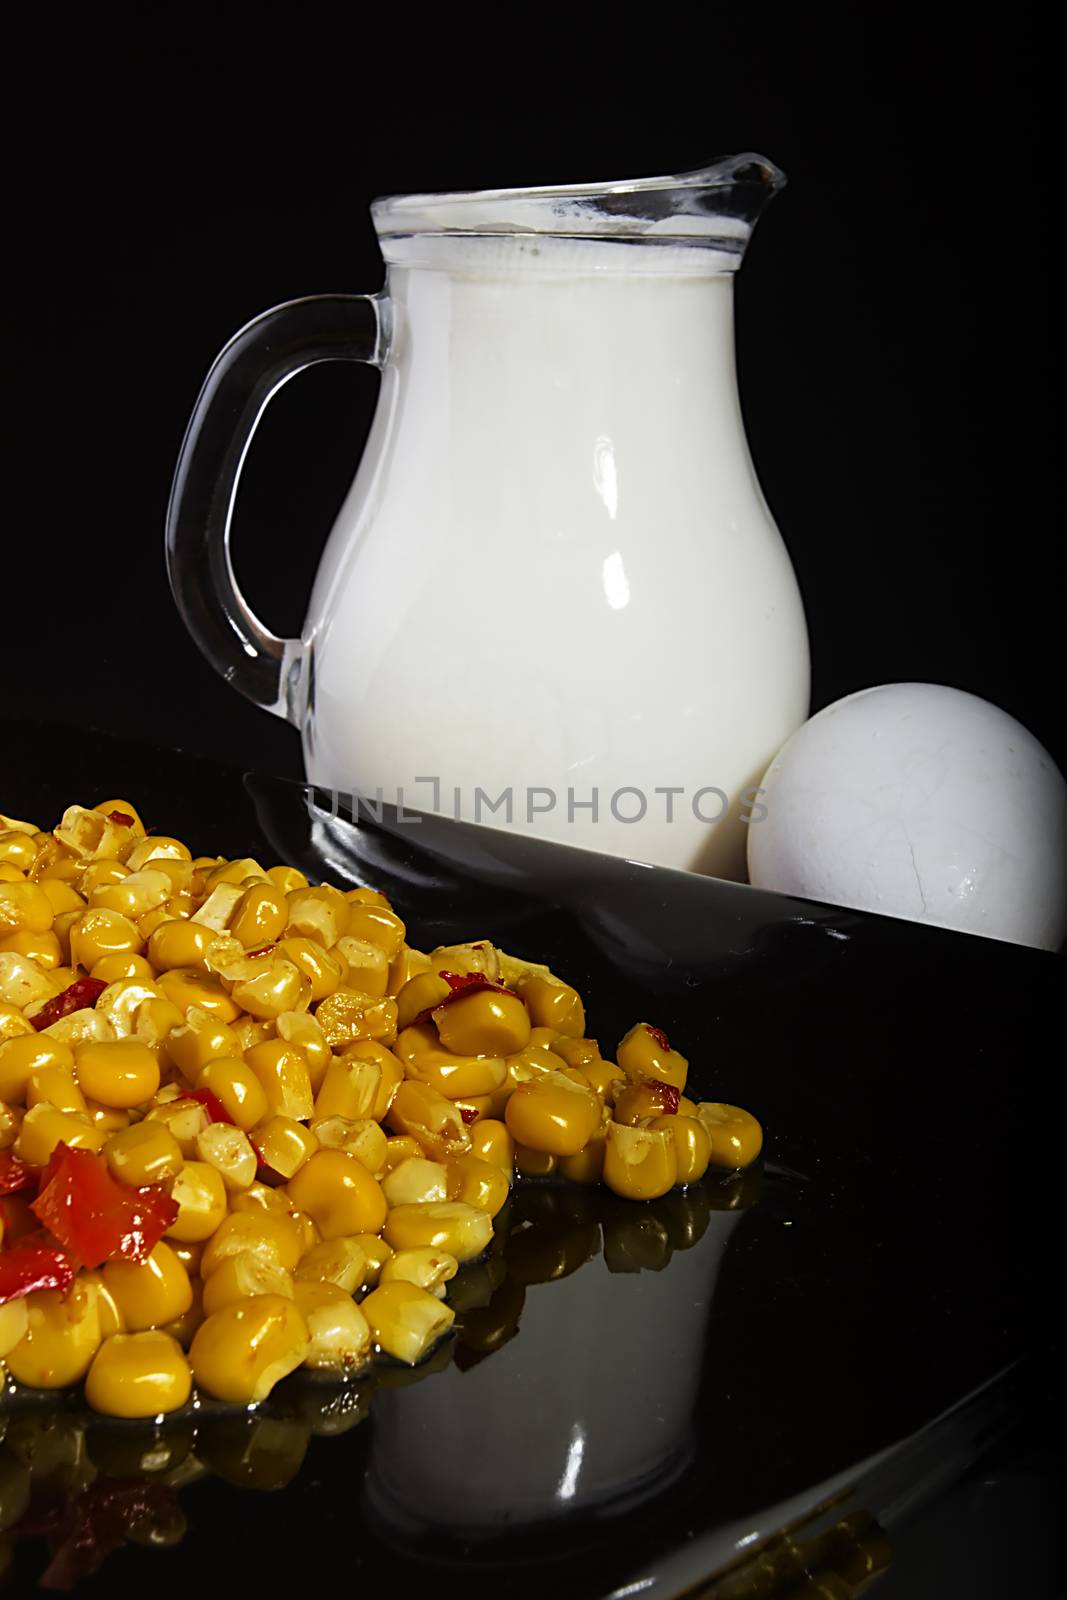 Corn and milk in a jug on a black reflective surface